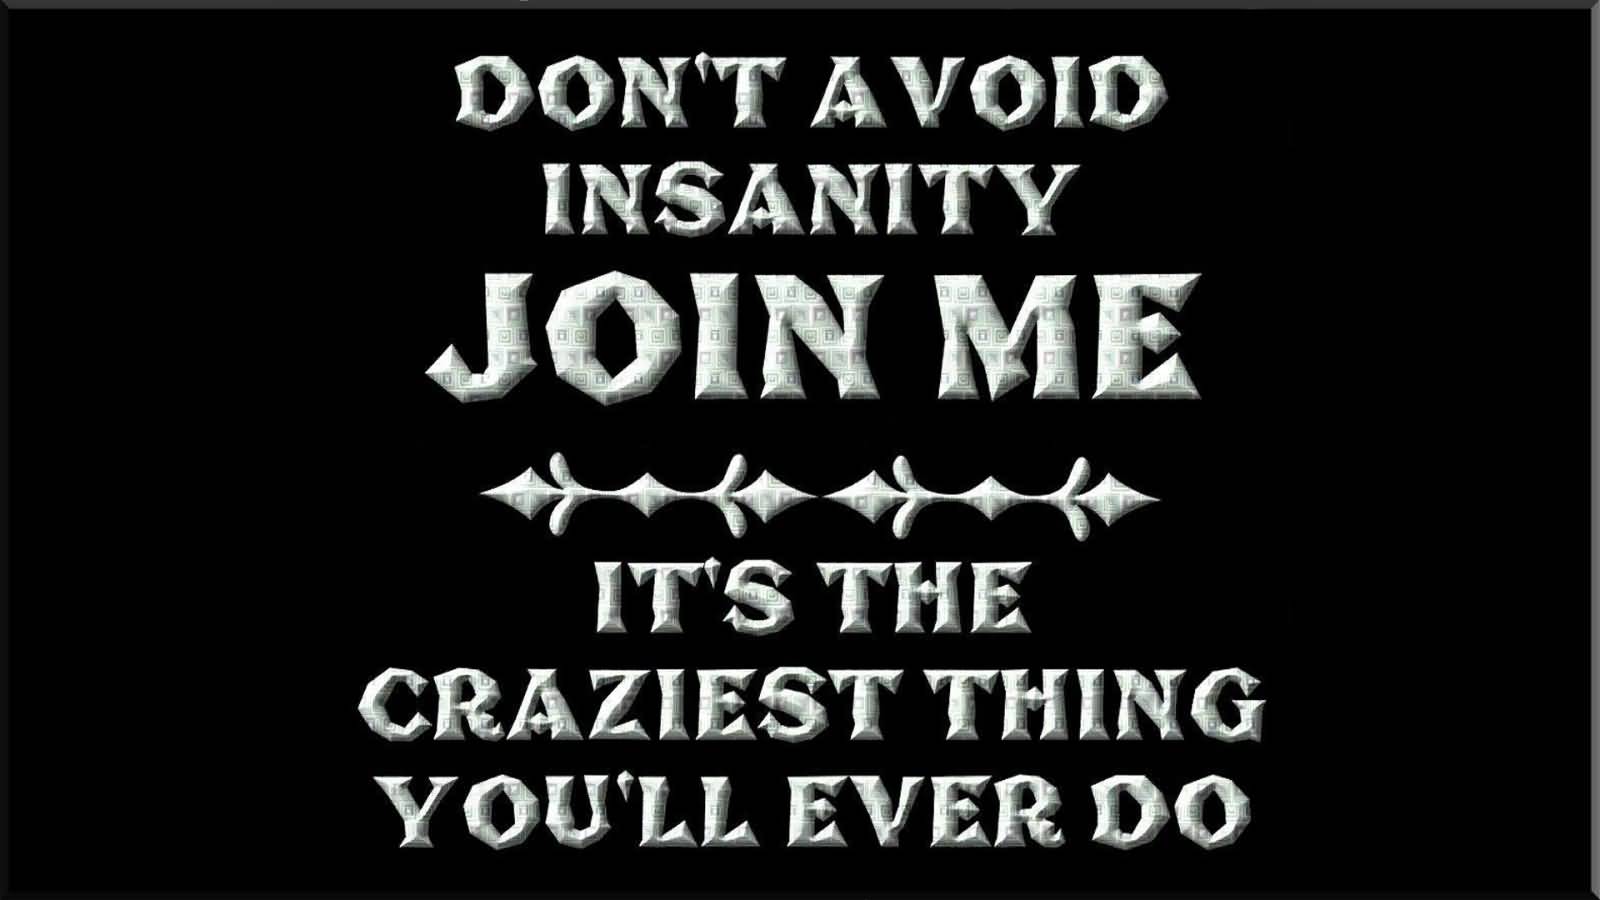 DON'T AVOID INSANITY JOIN ME IT'S THE CRAZIEST THING YOU'LL EVER DO